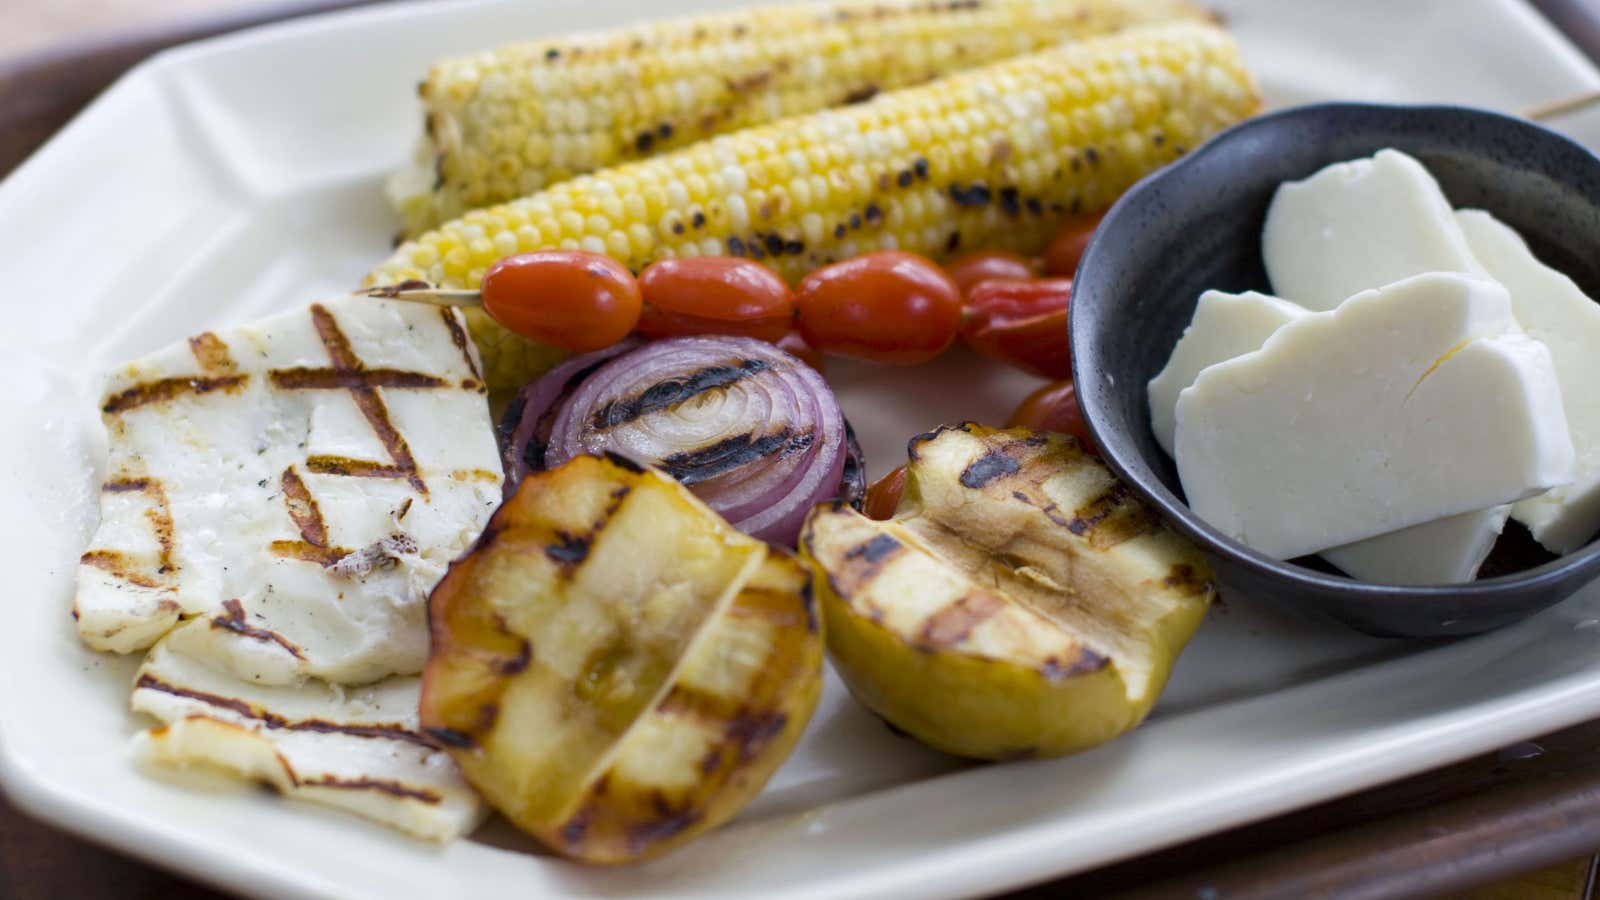 For Cyprus, halloumi is not a side dish.